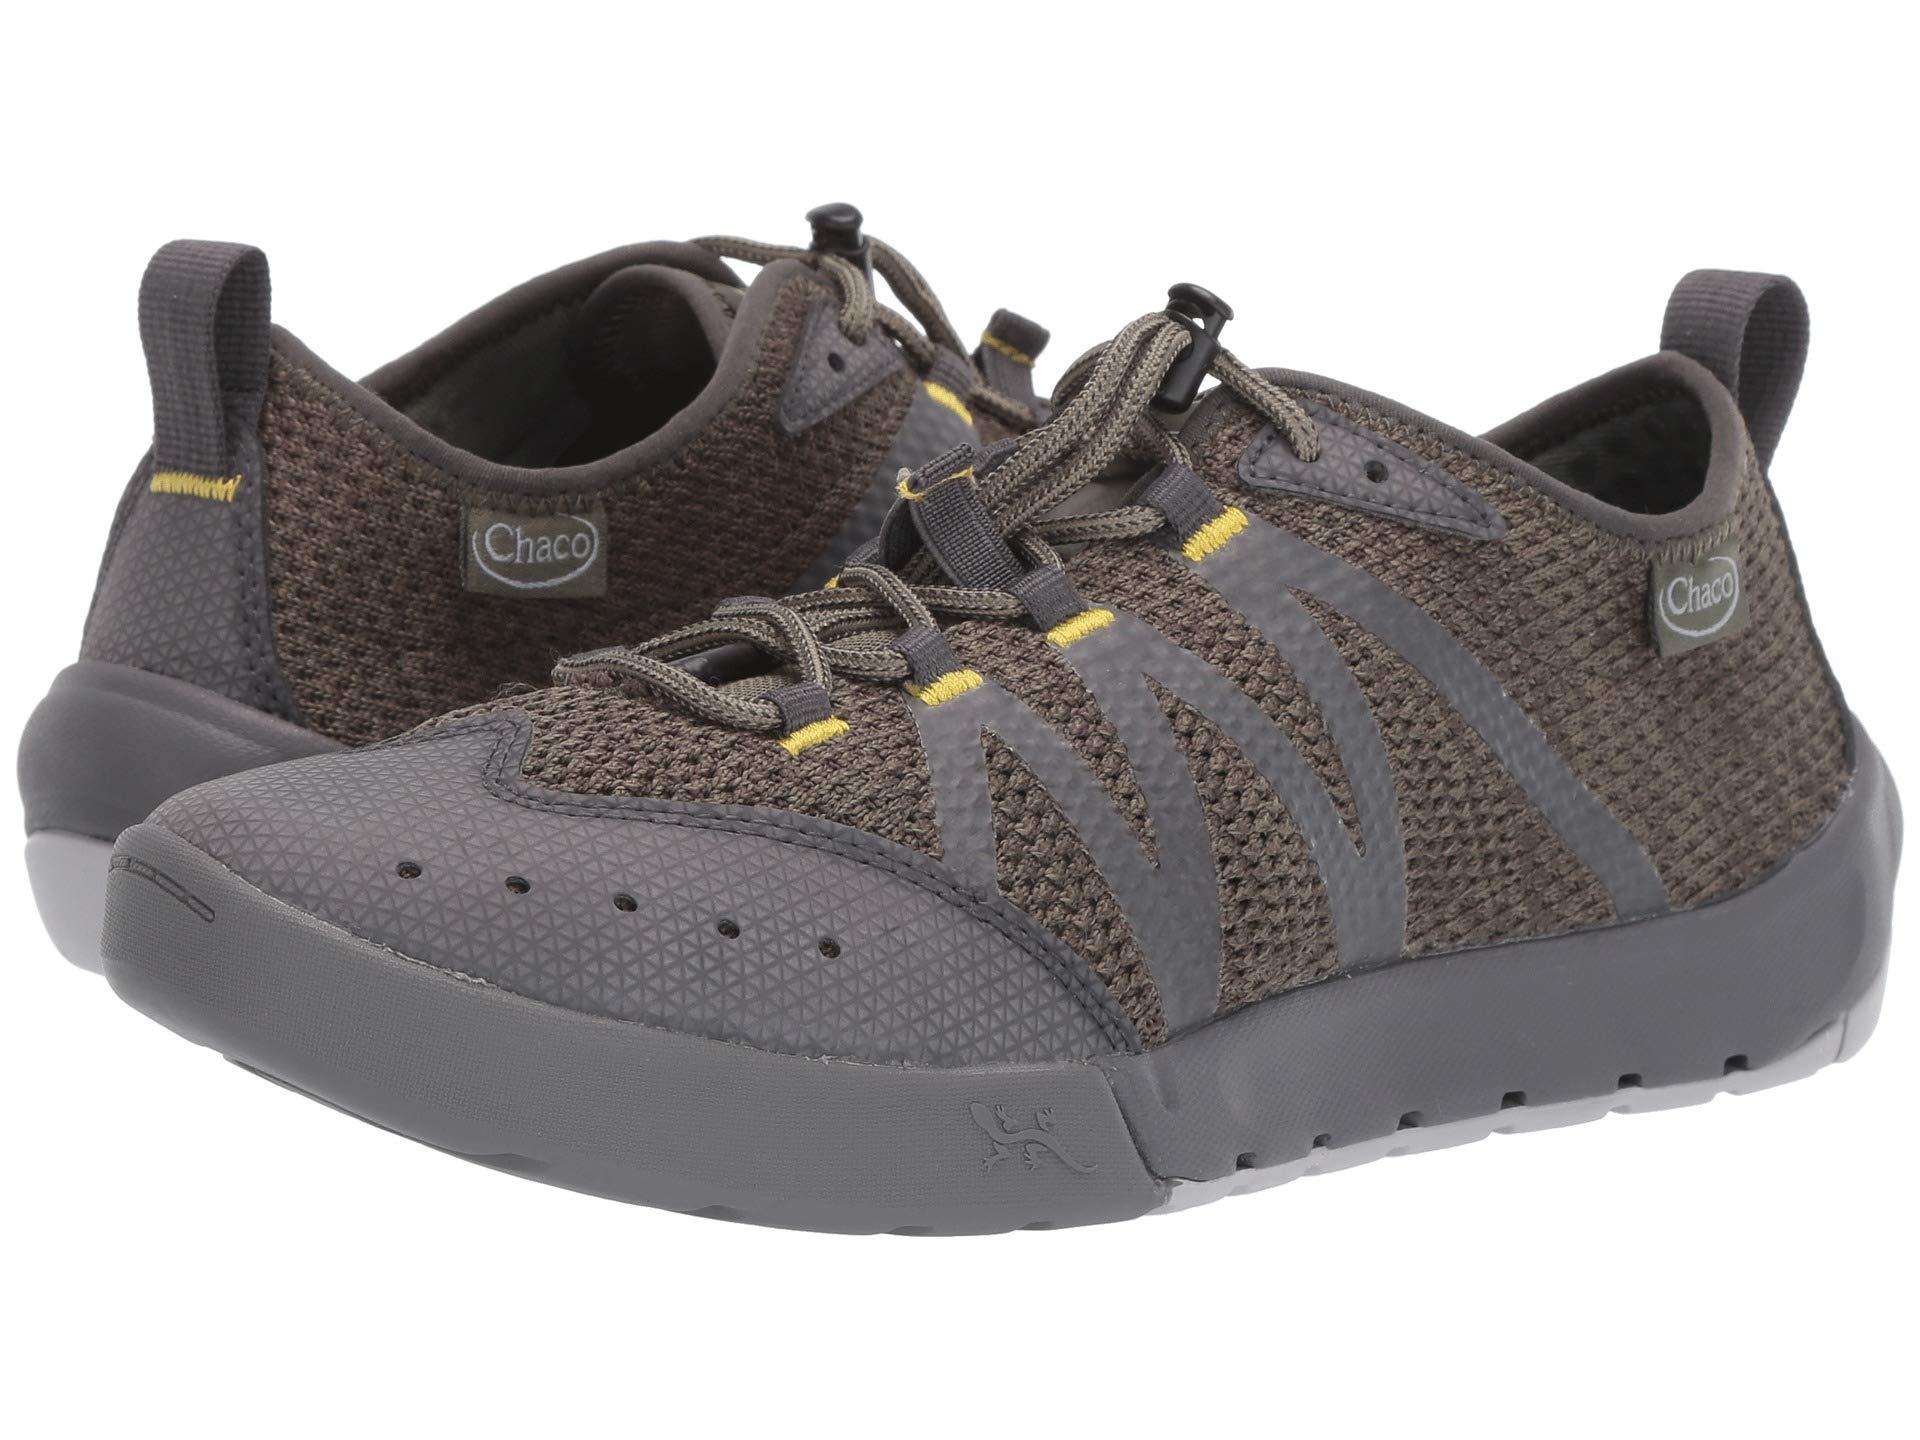 chaco torrent pro water shoes